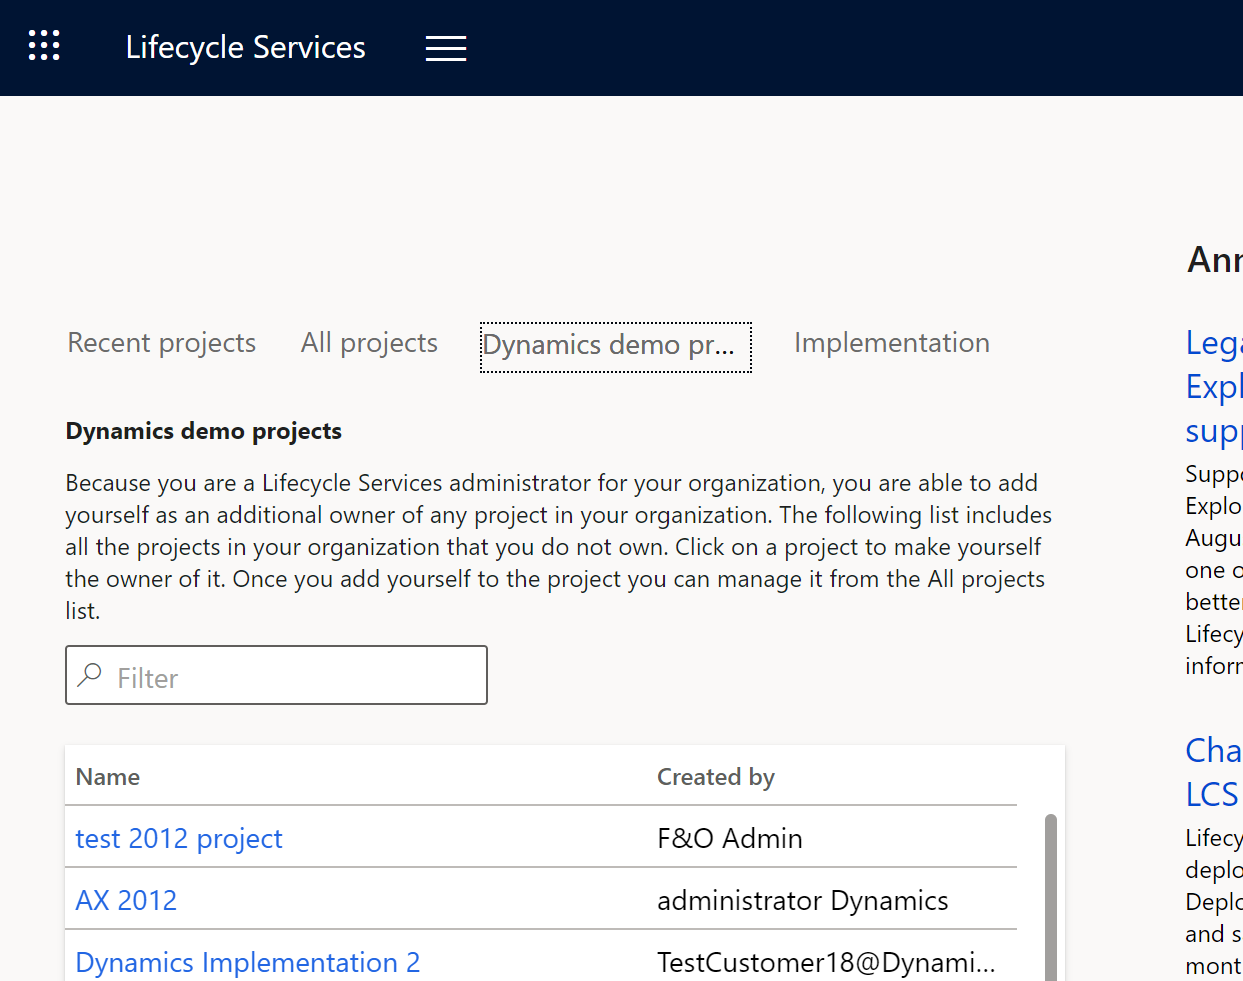 Message in Lifecycle Services that states that organization admins can add themselves to any project.